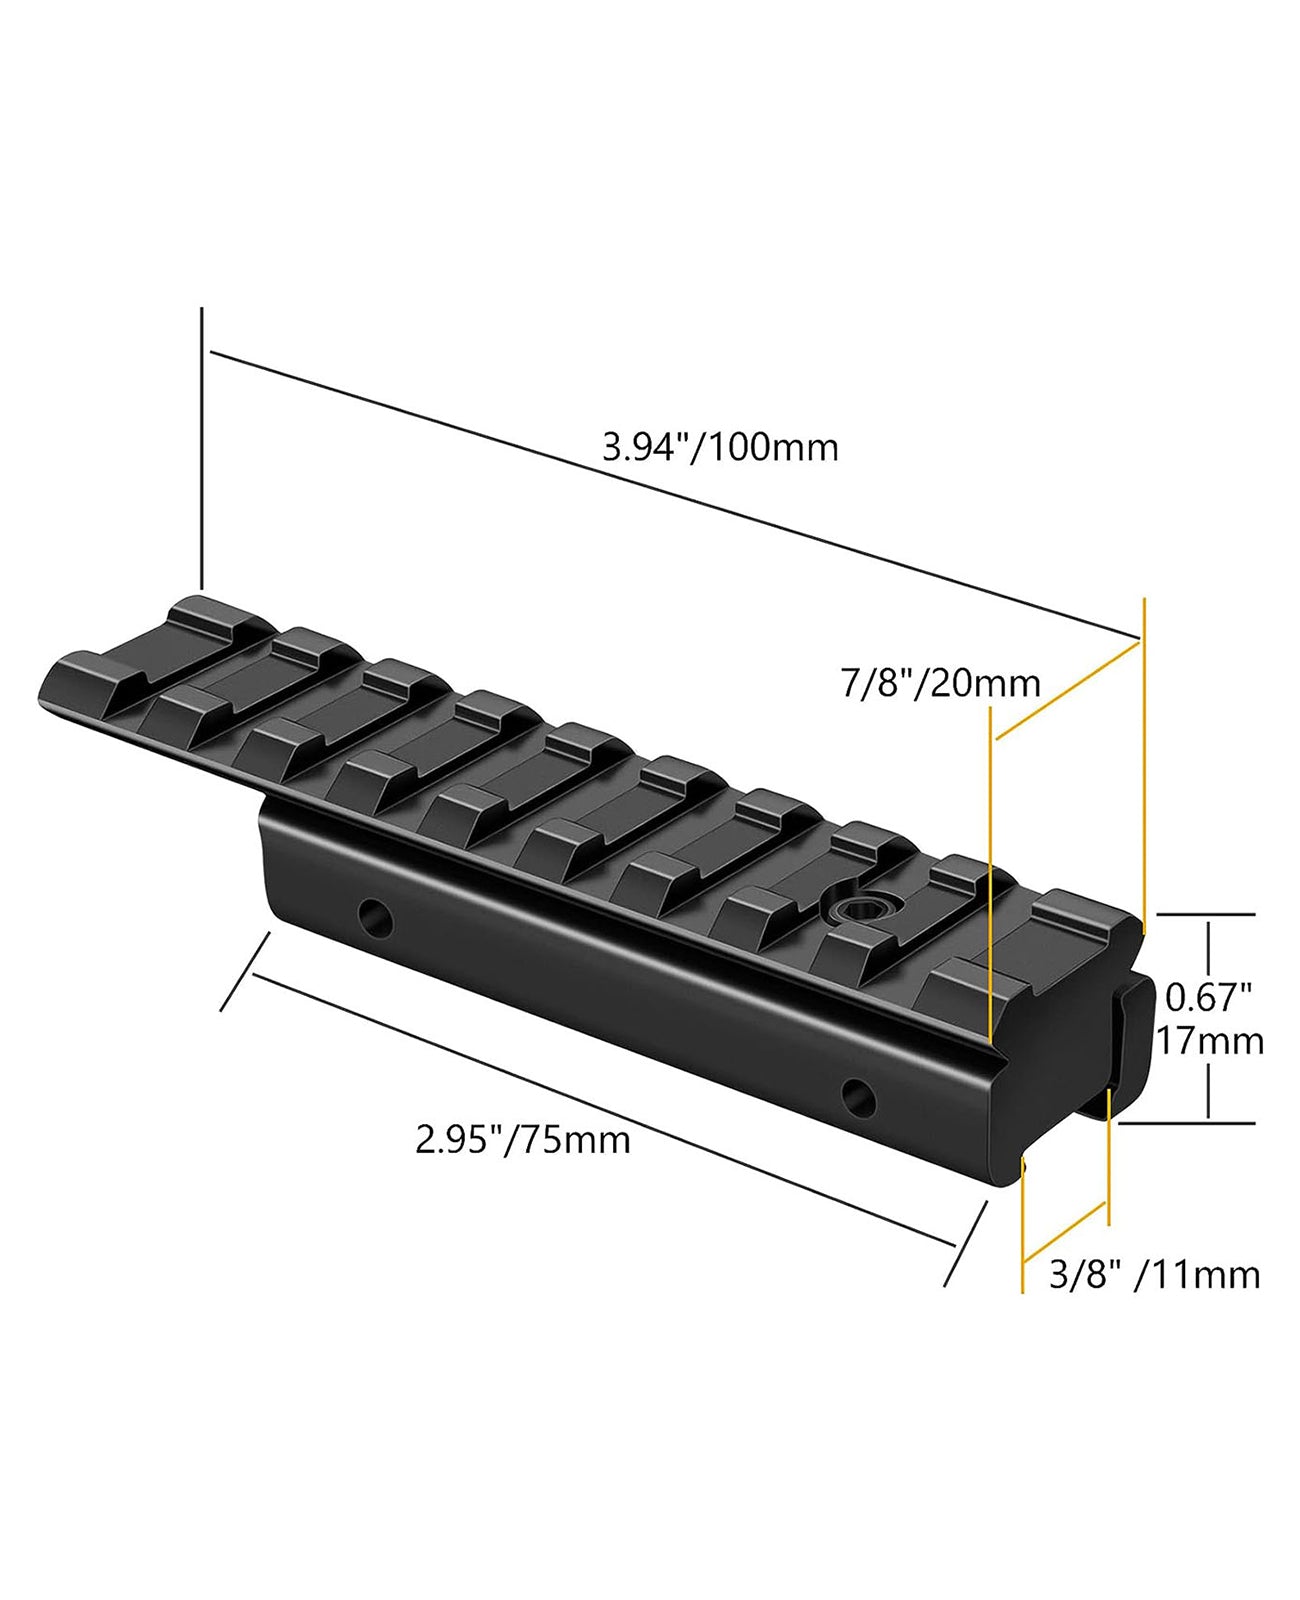 CVLIFE Dovetail to Picatinny Rail Adapter 11mm to 20mm Rail Adapter